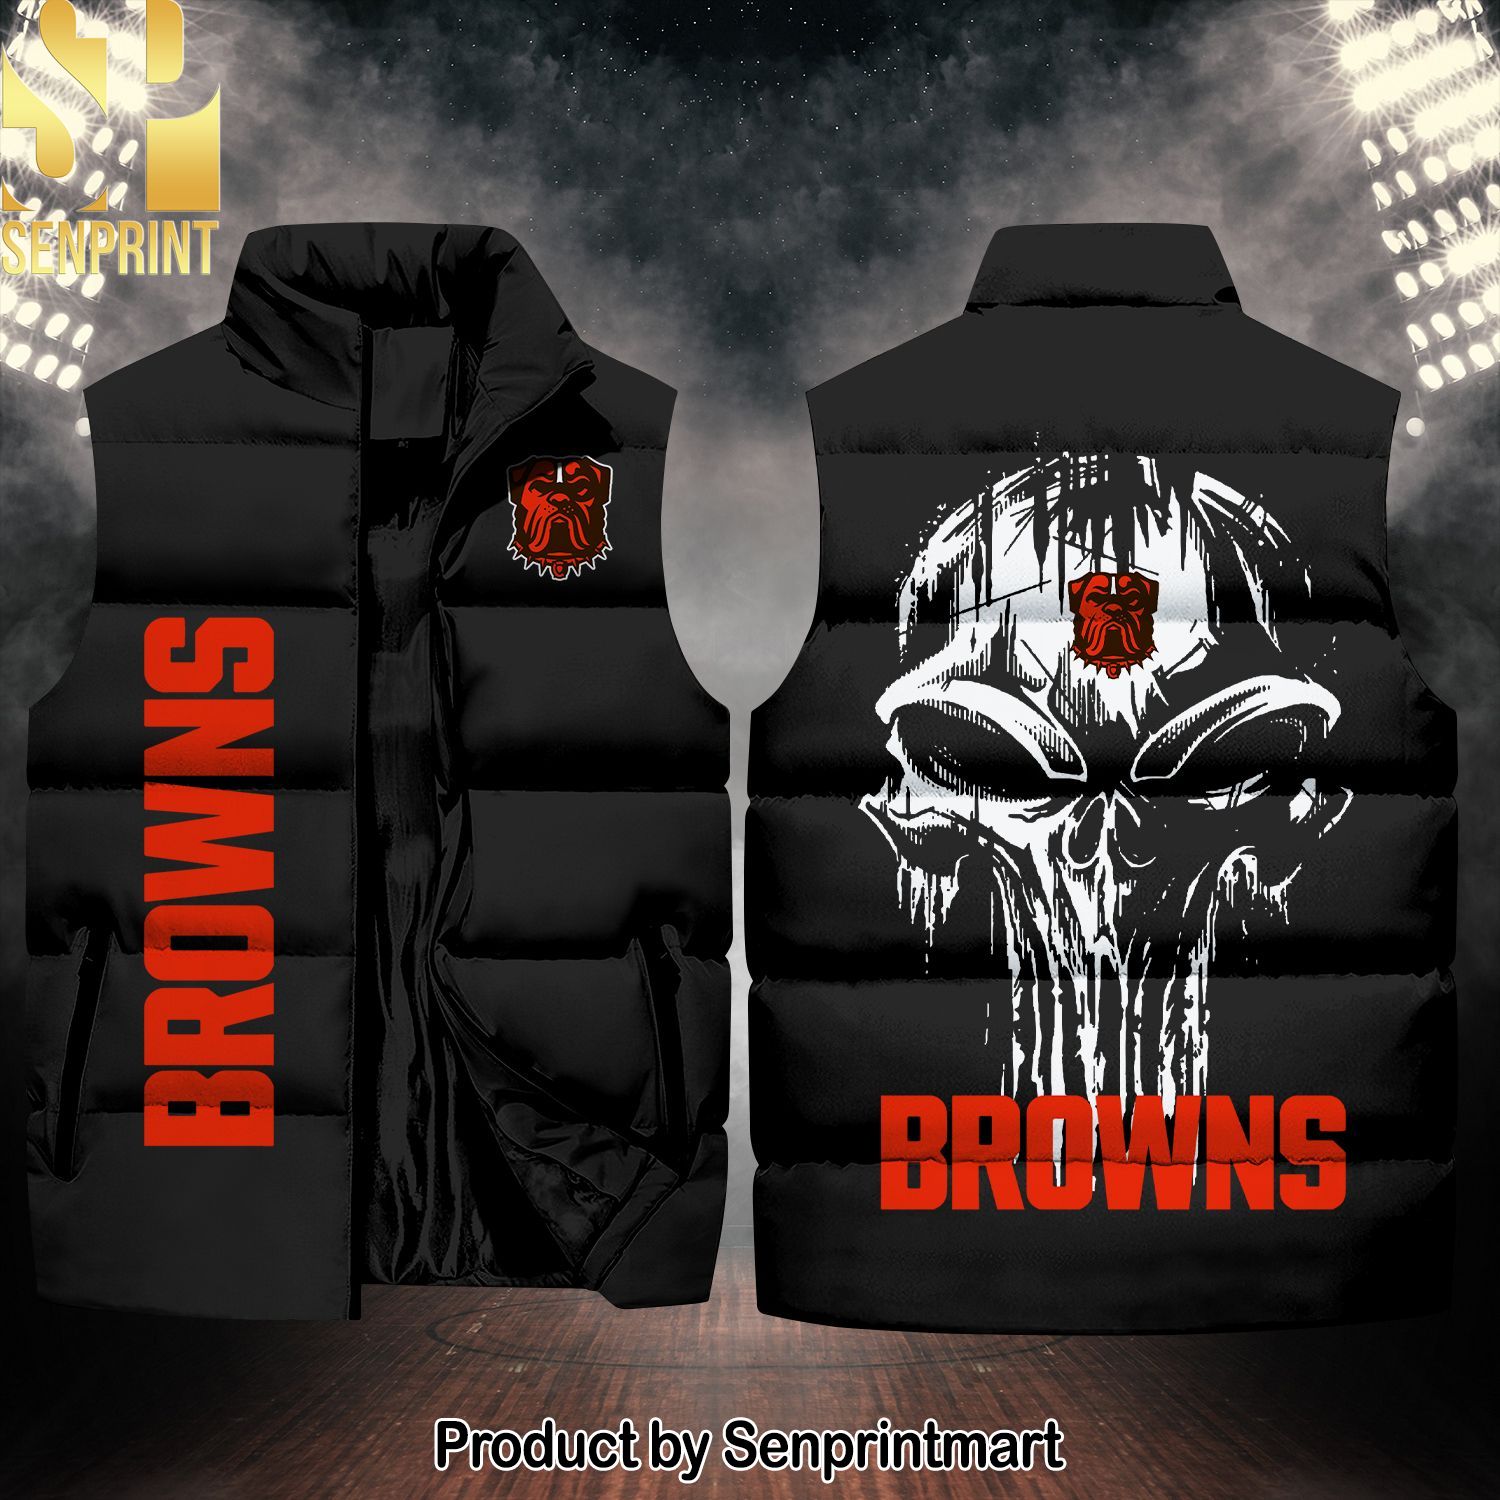 National Football League Cleveland Browns Skull Hot Outfit Sleeveless Jacket